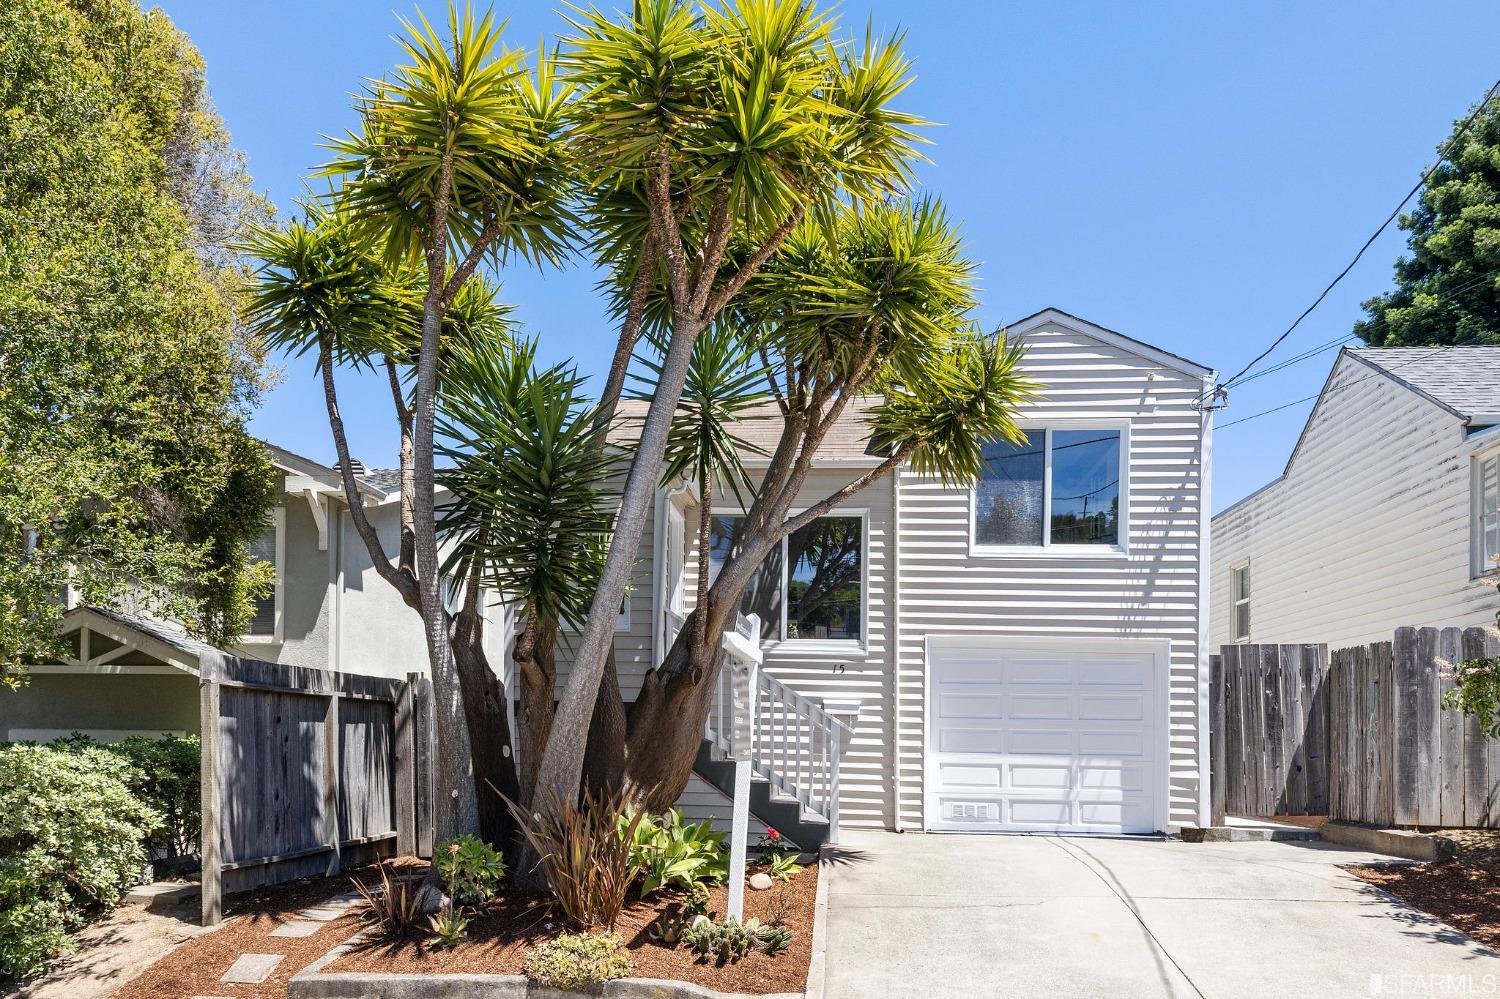 a palm tree sitting in front of a house